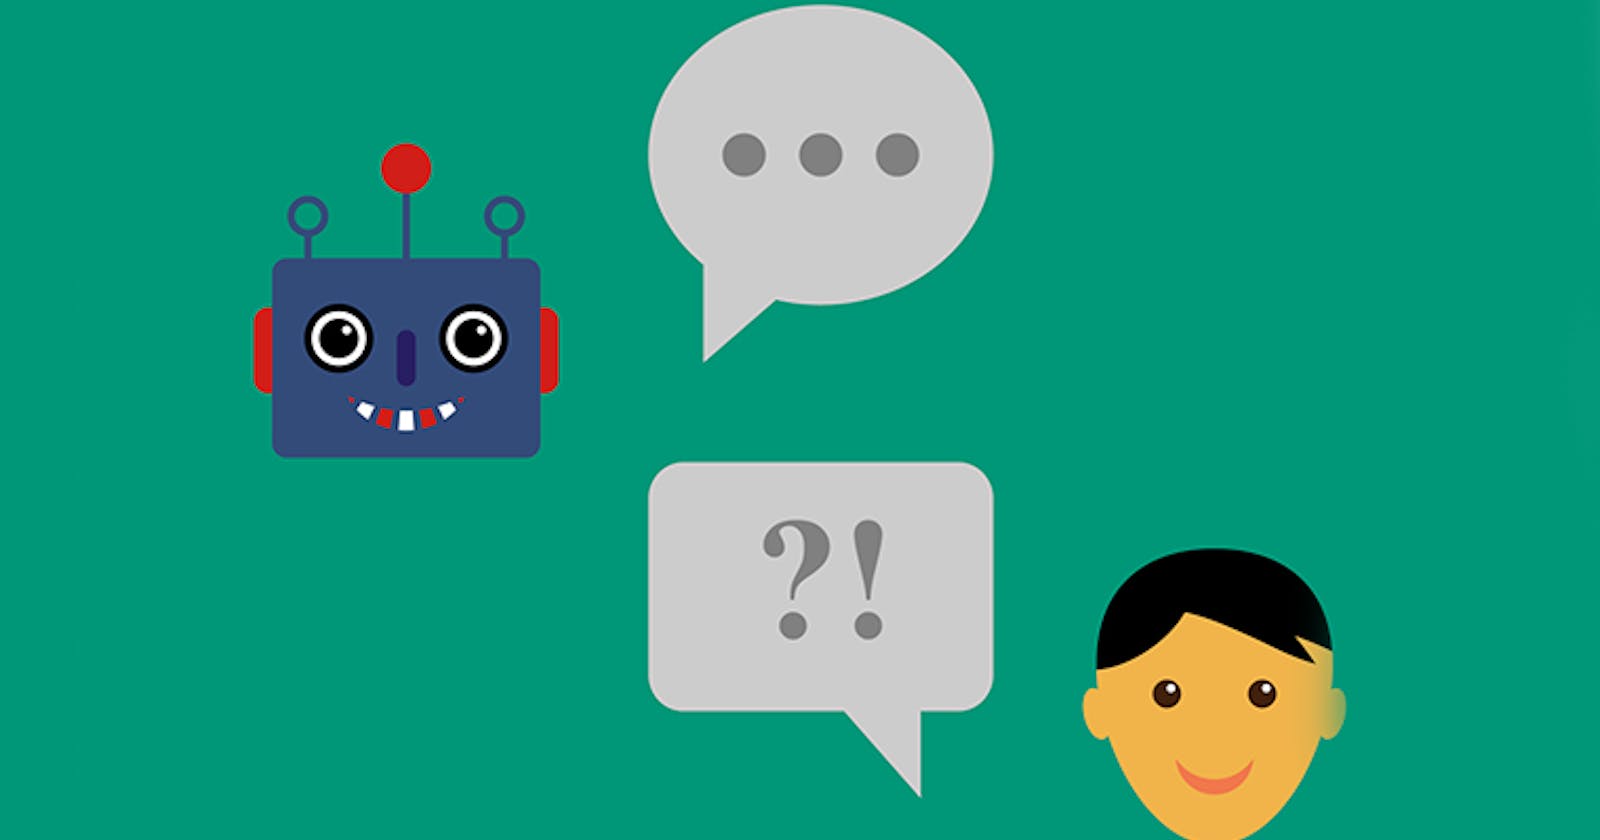 Building Conversational AI with Blenderbot